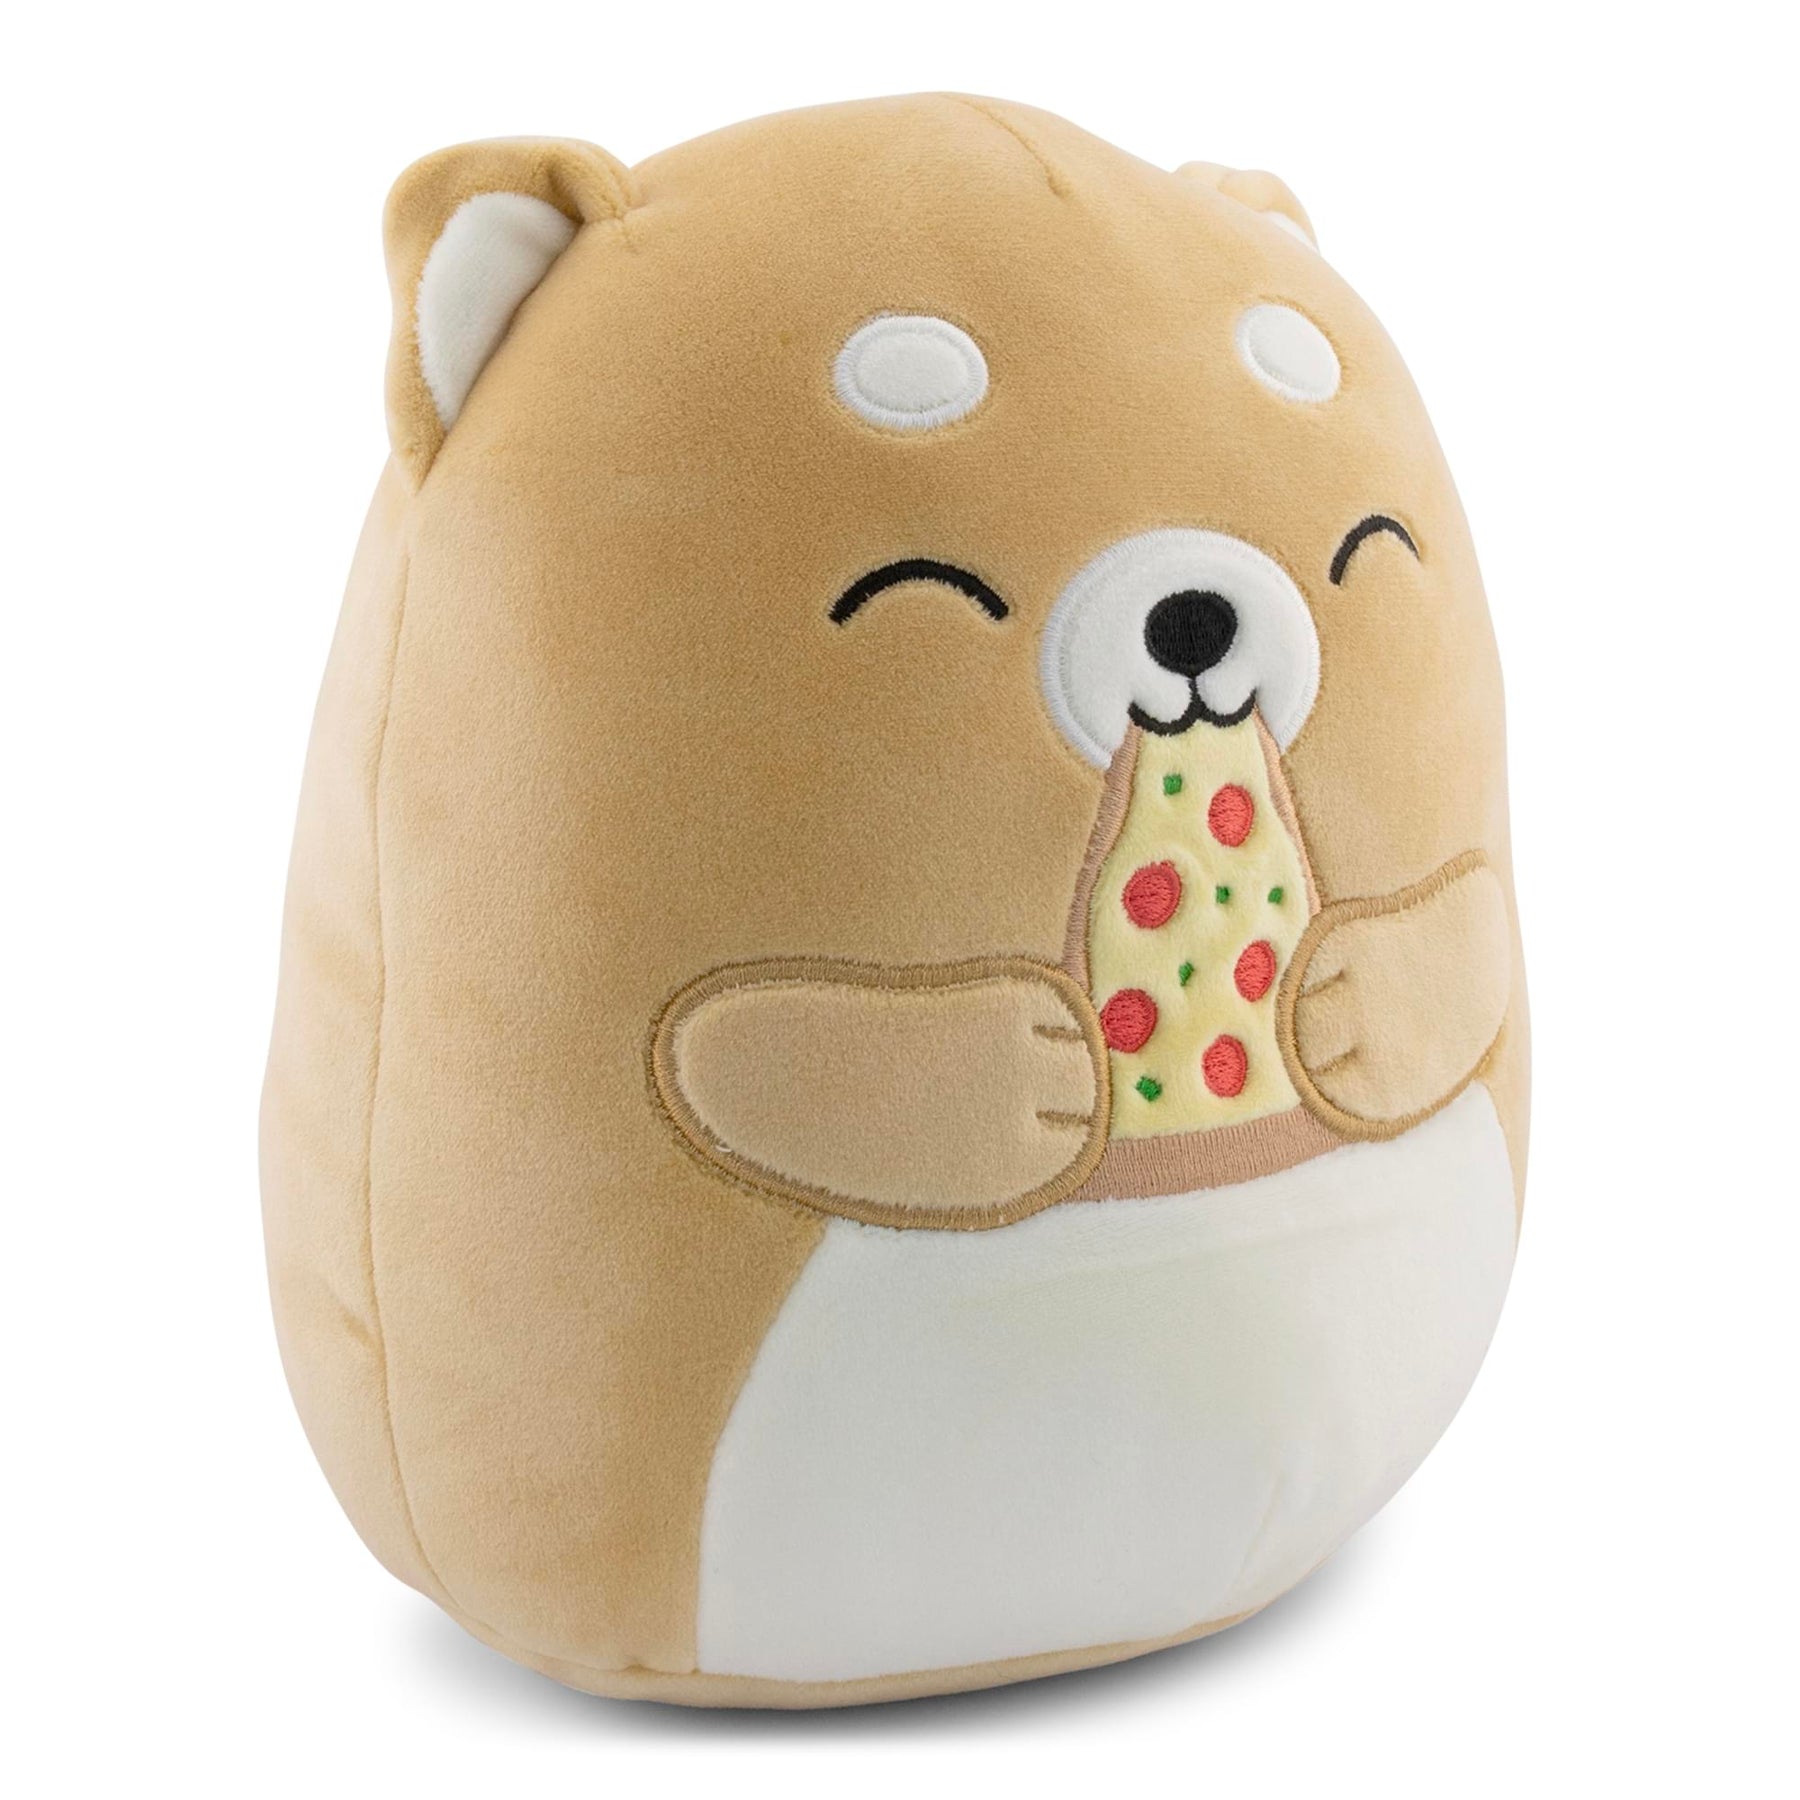 Squishmallows 8 Inch Plush | Angie The Shiba Inu With Pizza